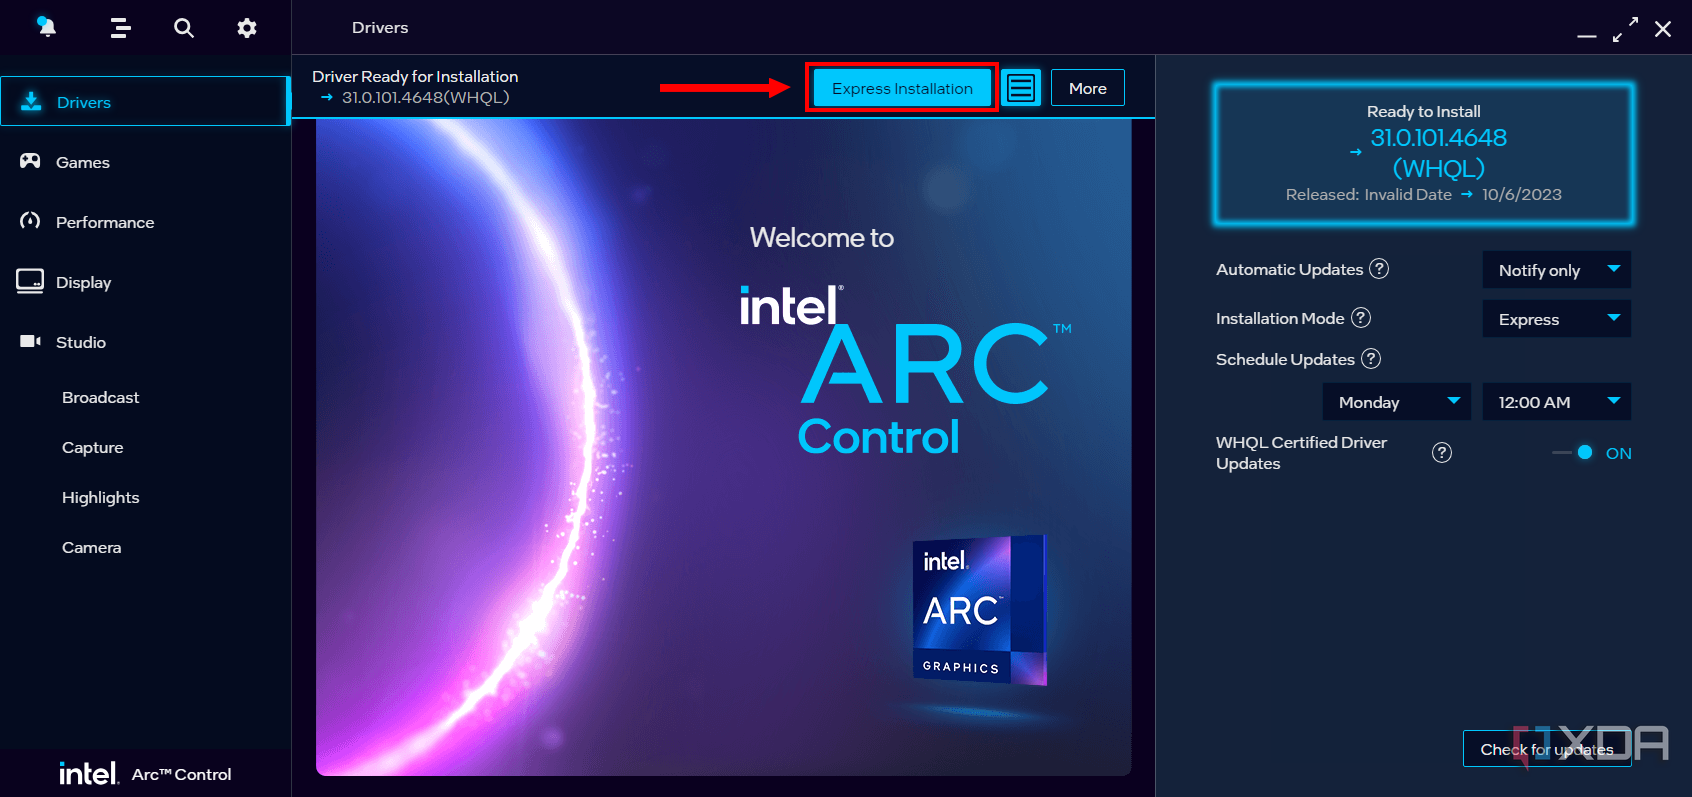 Screenshot of Intel Arc Control with the Express installation button highlighted